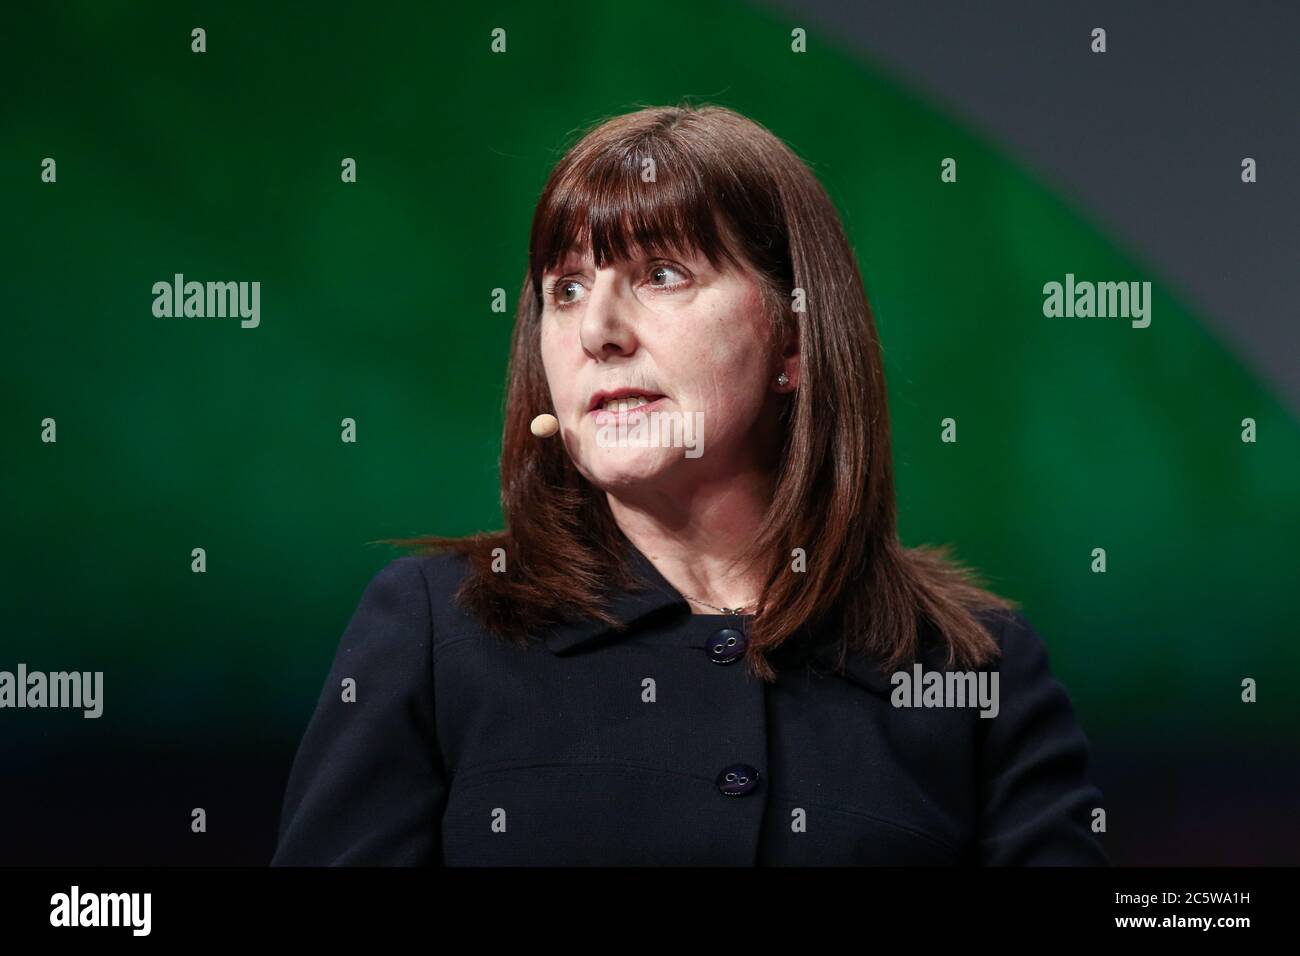 Lesley Griffiths MS for Wrexham and cabinet secretary for environment and rural affairs in the Welsh government, on stage during the 2017 NFU Conferen Stock Photo